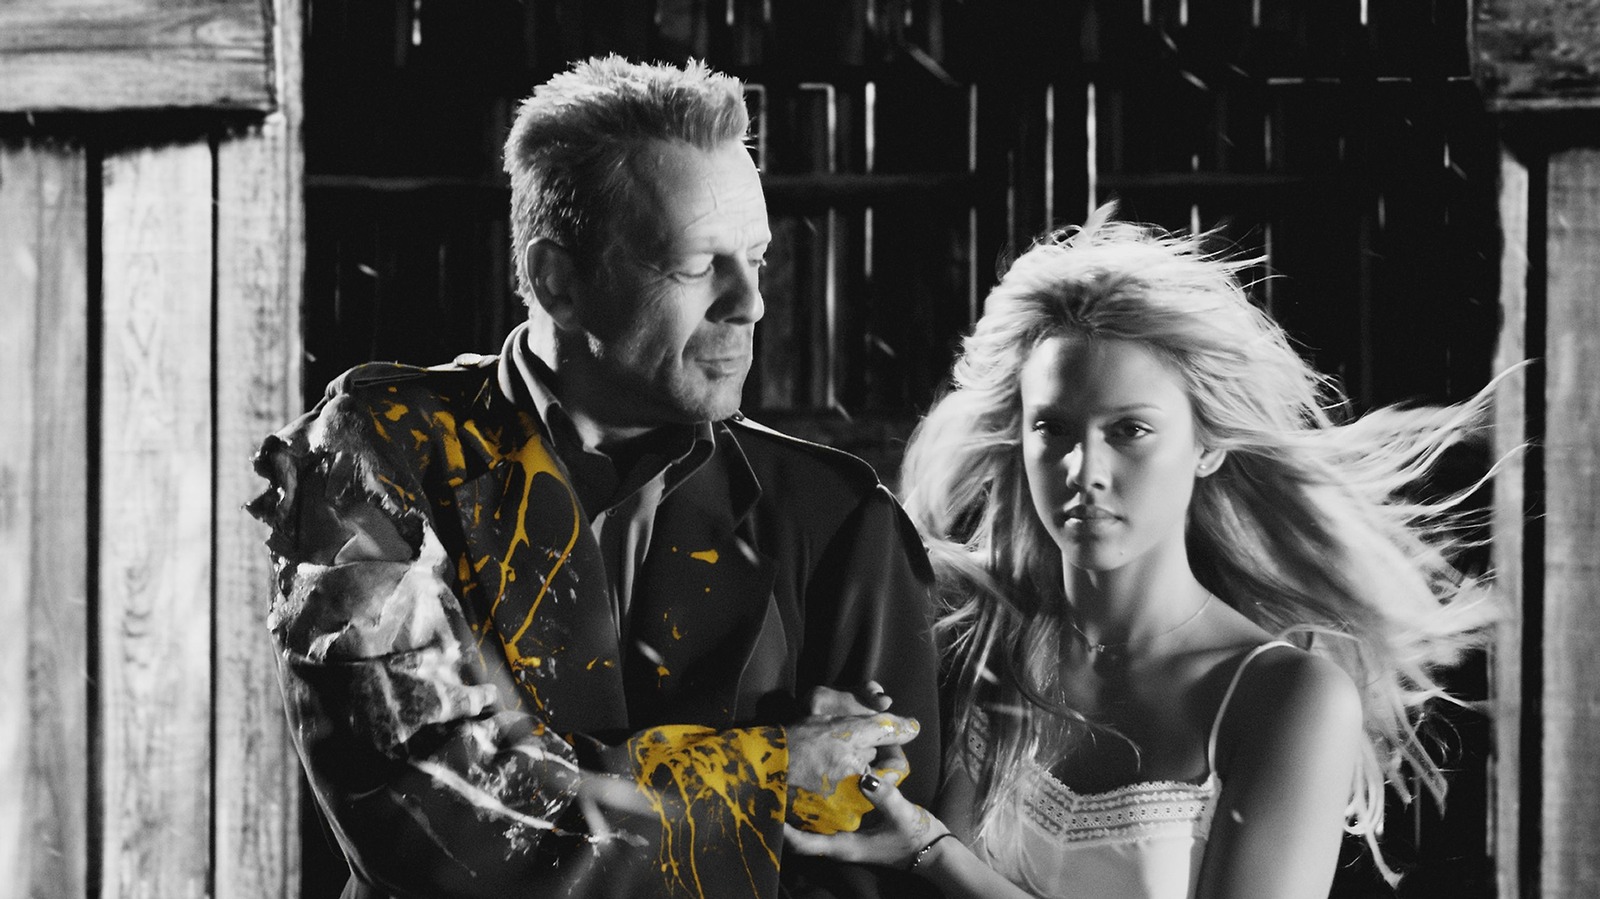 #Sin City’s Set Was Home To A Small Pulp Fiction Reunion